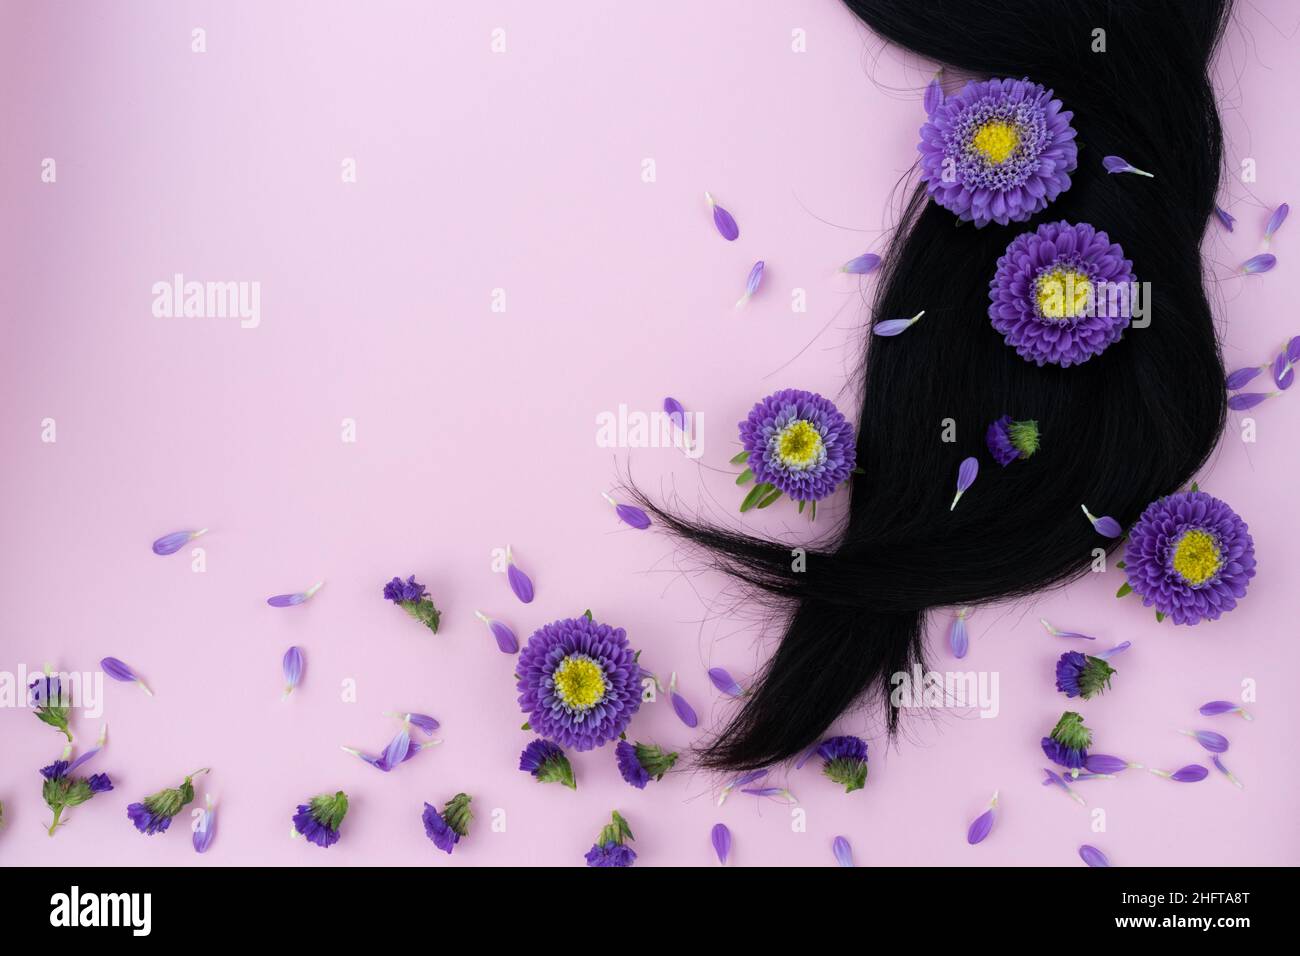 Black hair with lilac flowers and petals on it. Hair care concept. Stock Photo